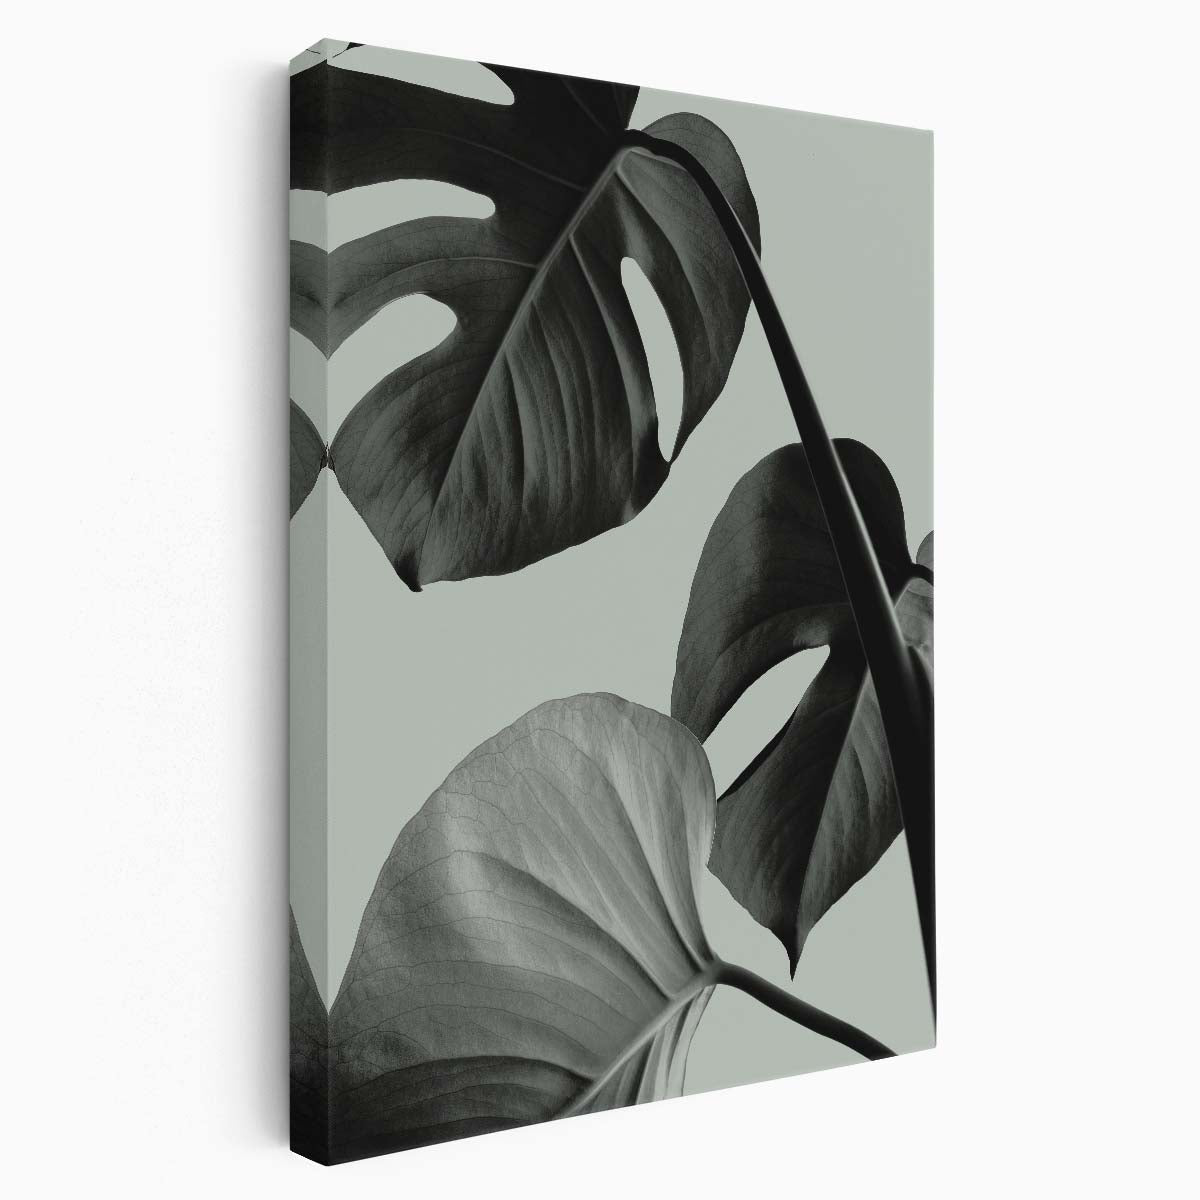 1XStudio Monstera Leaves Botanical Photography in Teal with Plain Background by Luxuriance Designs, made in USA